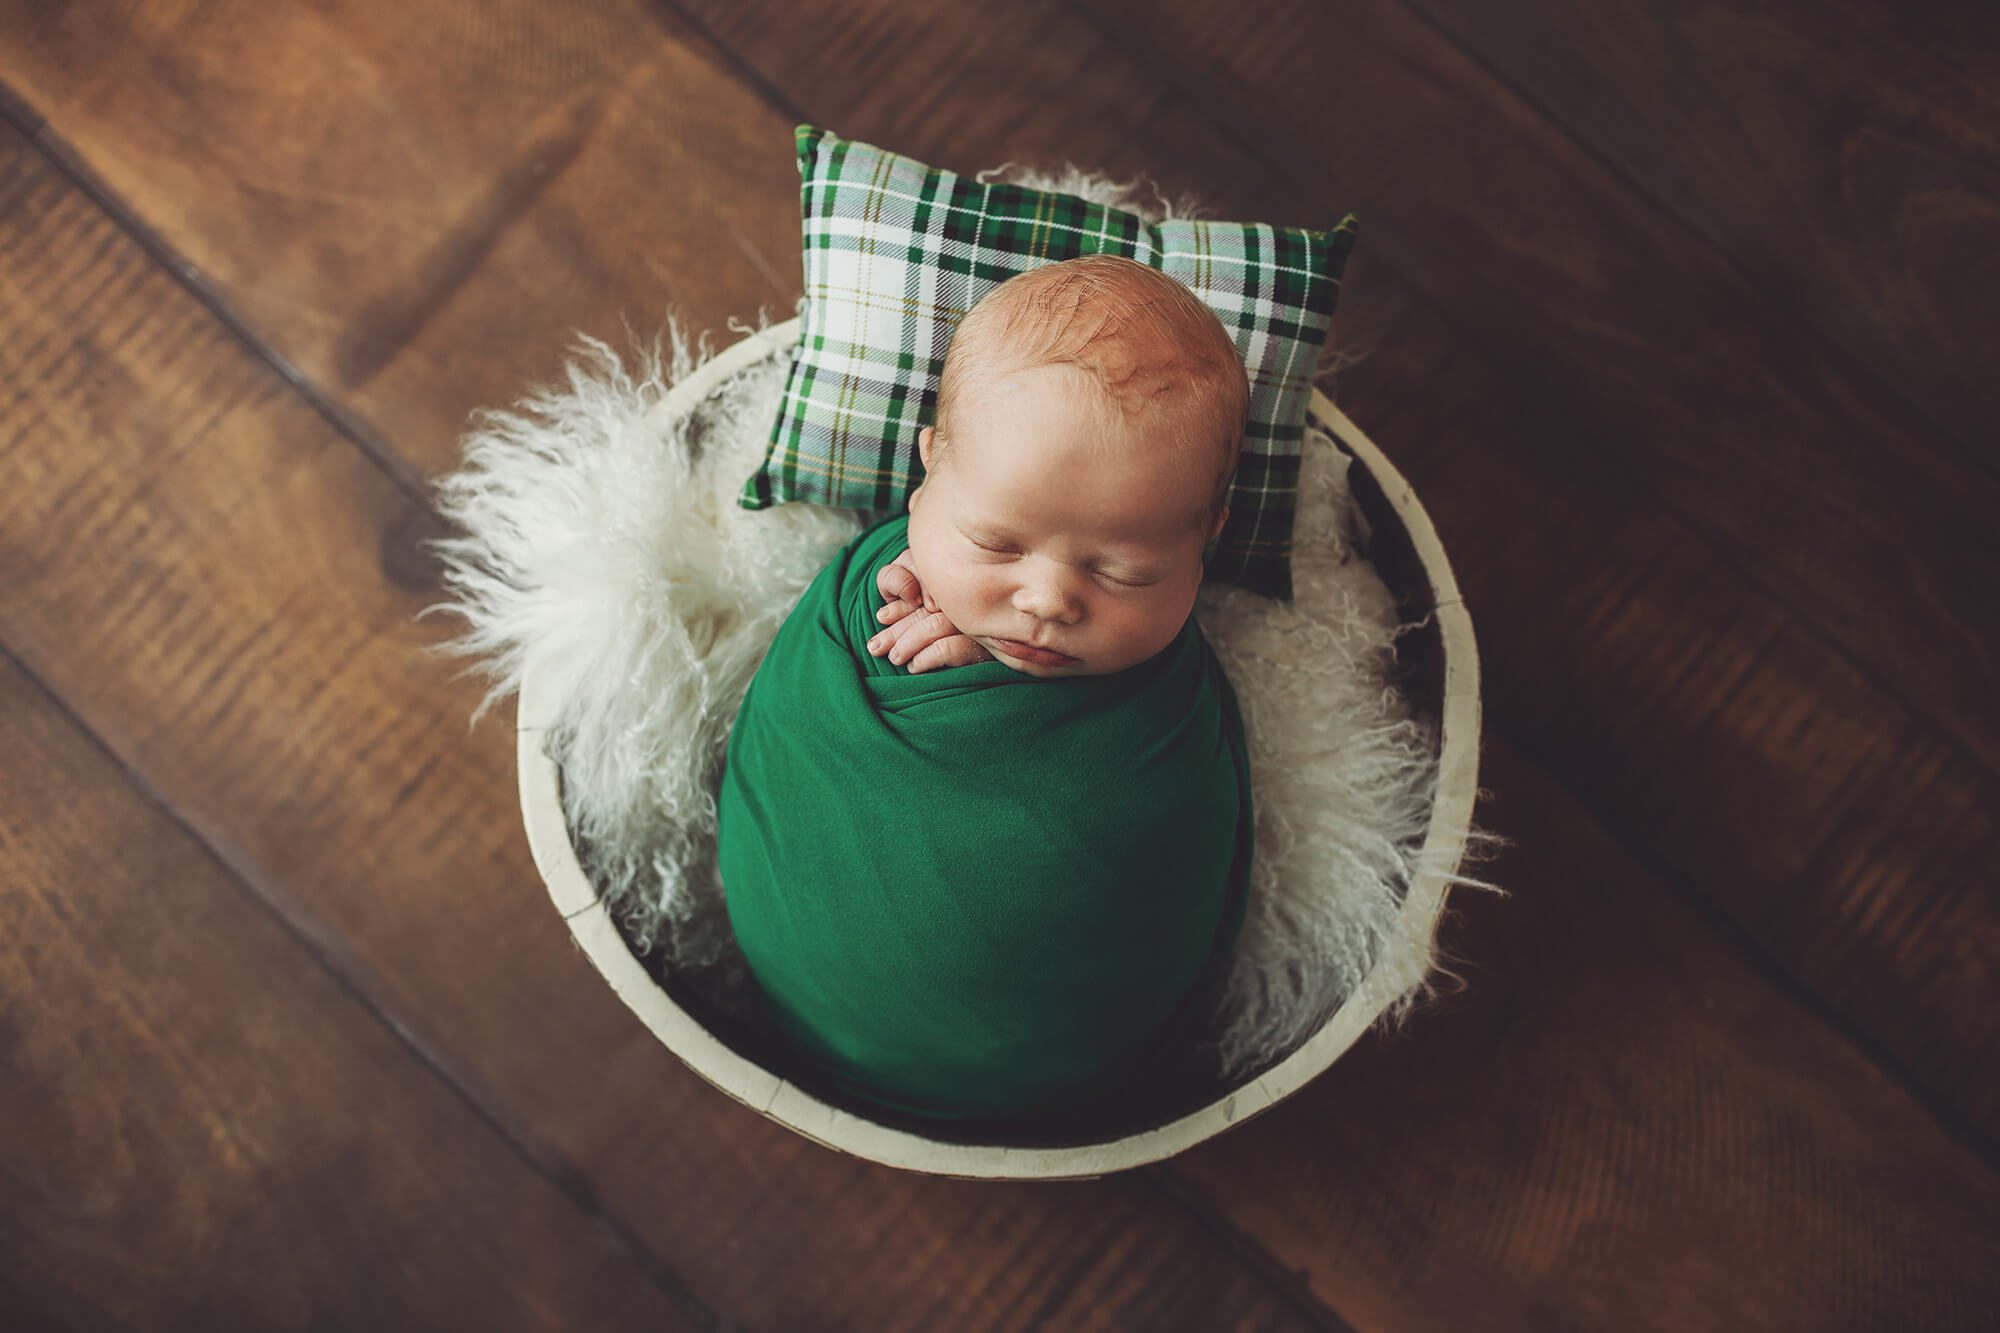 Green wrap and plaid pillow for hudsen